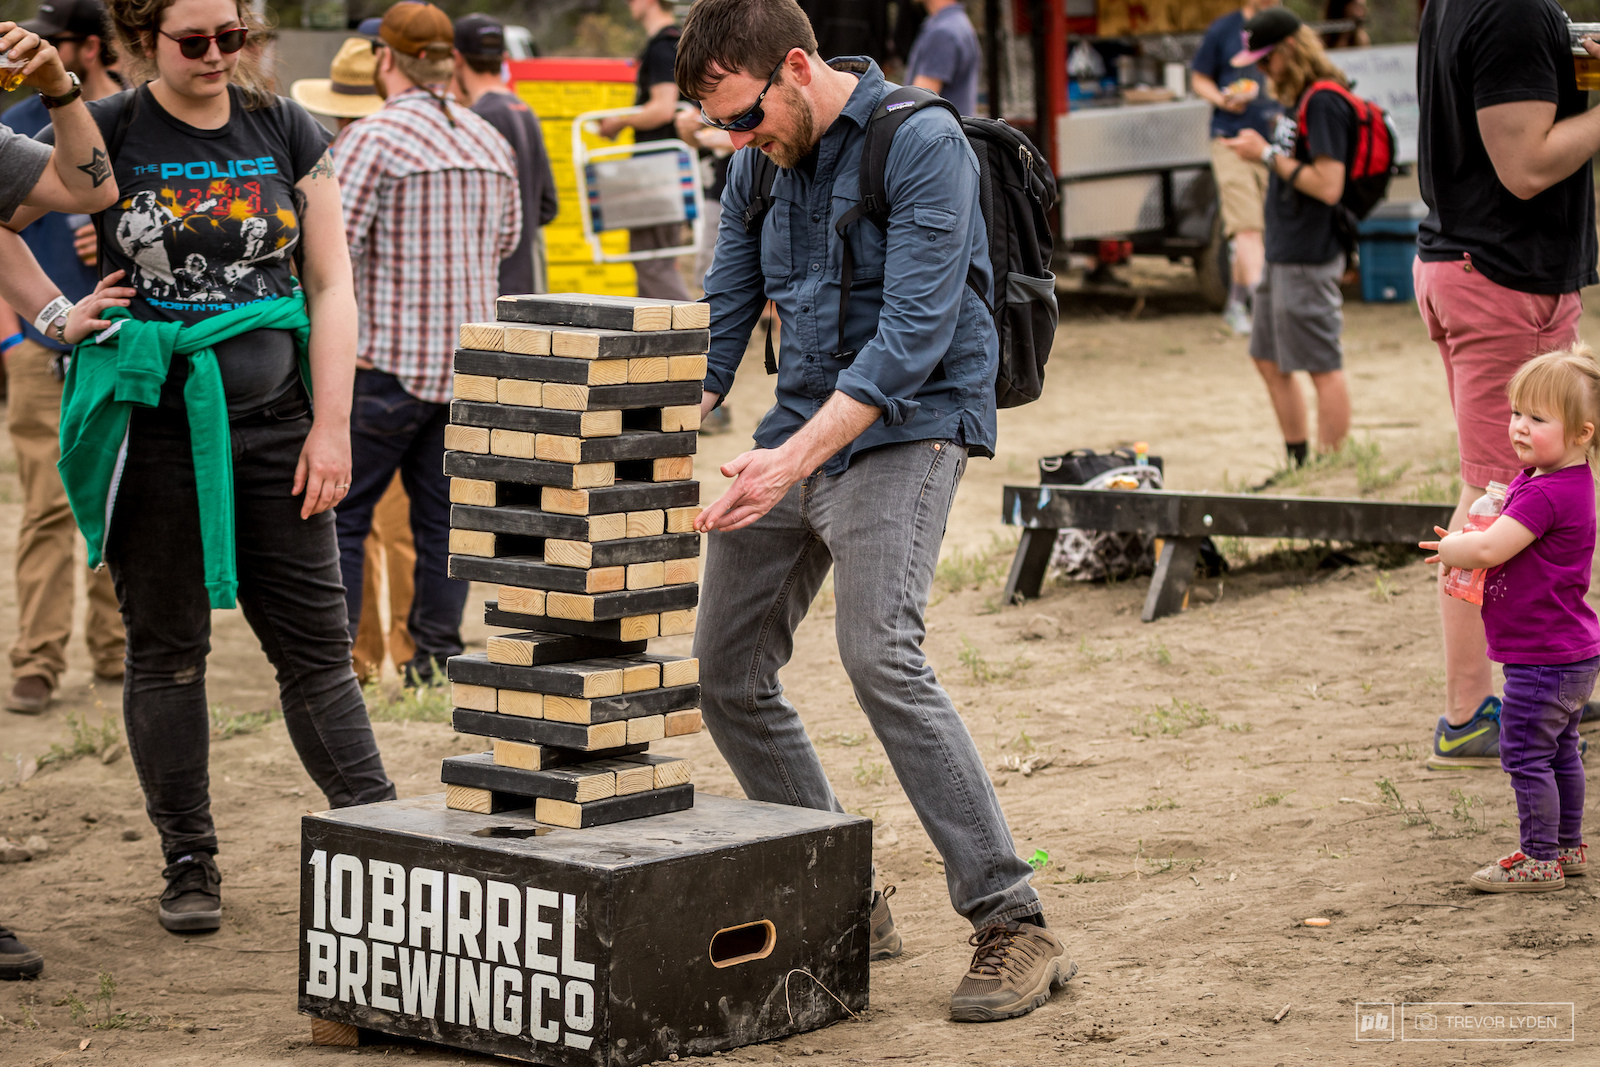 Giant jenga is always a crowd pleaser at 10 Barrel events.